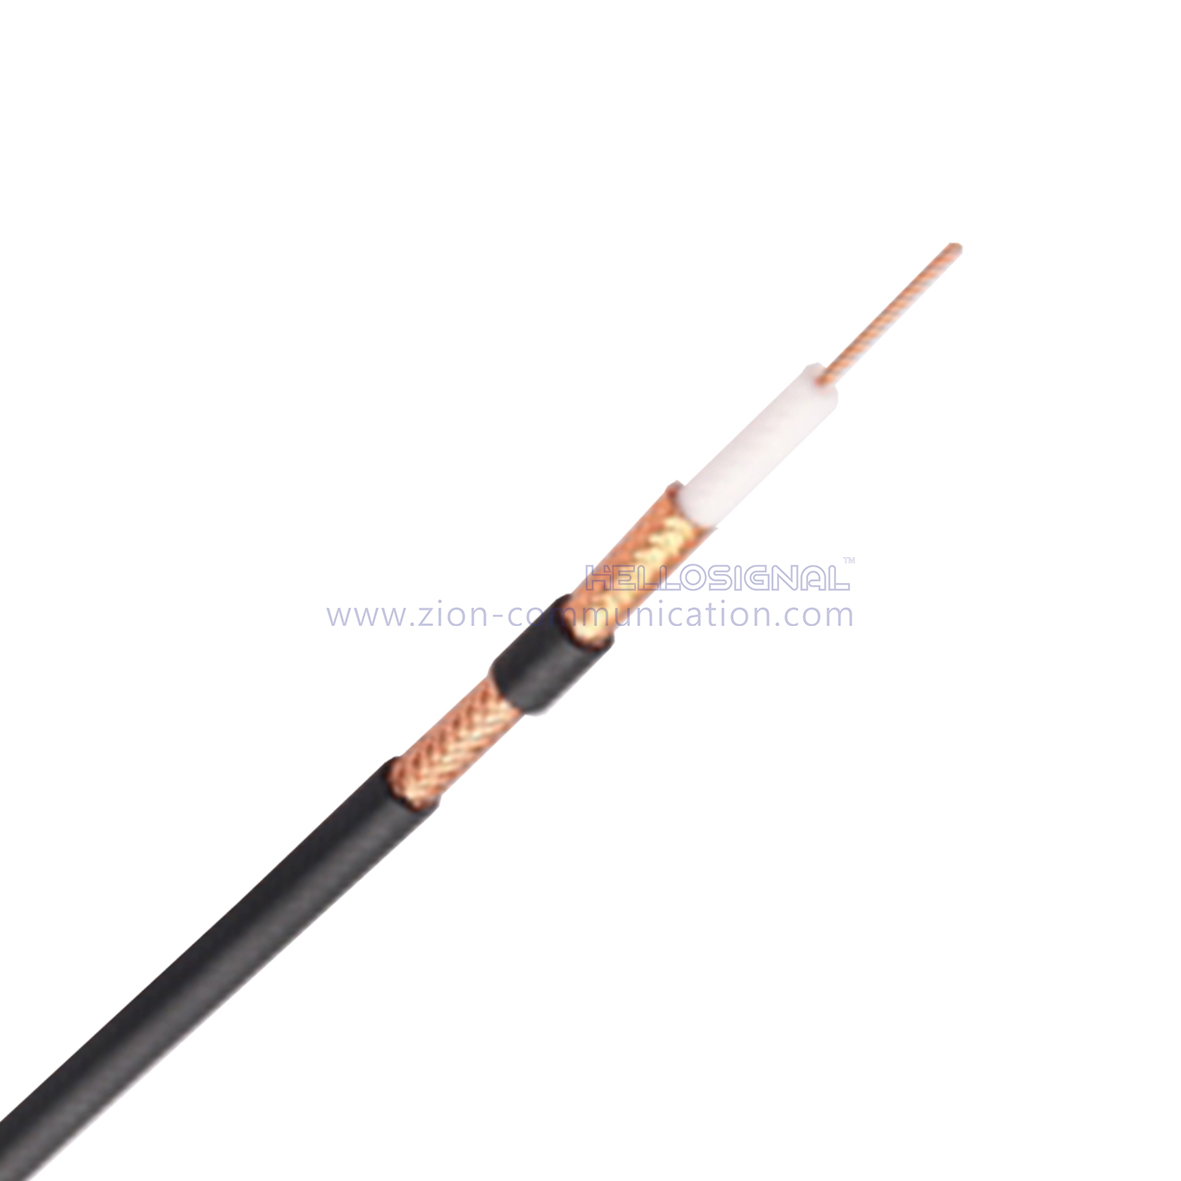 CT233 CPE Coaxial Cable